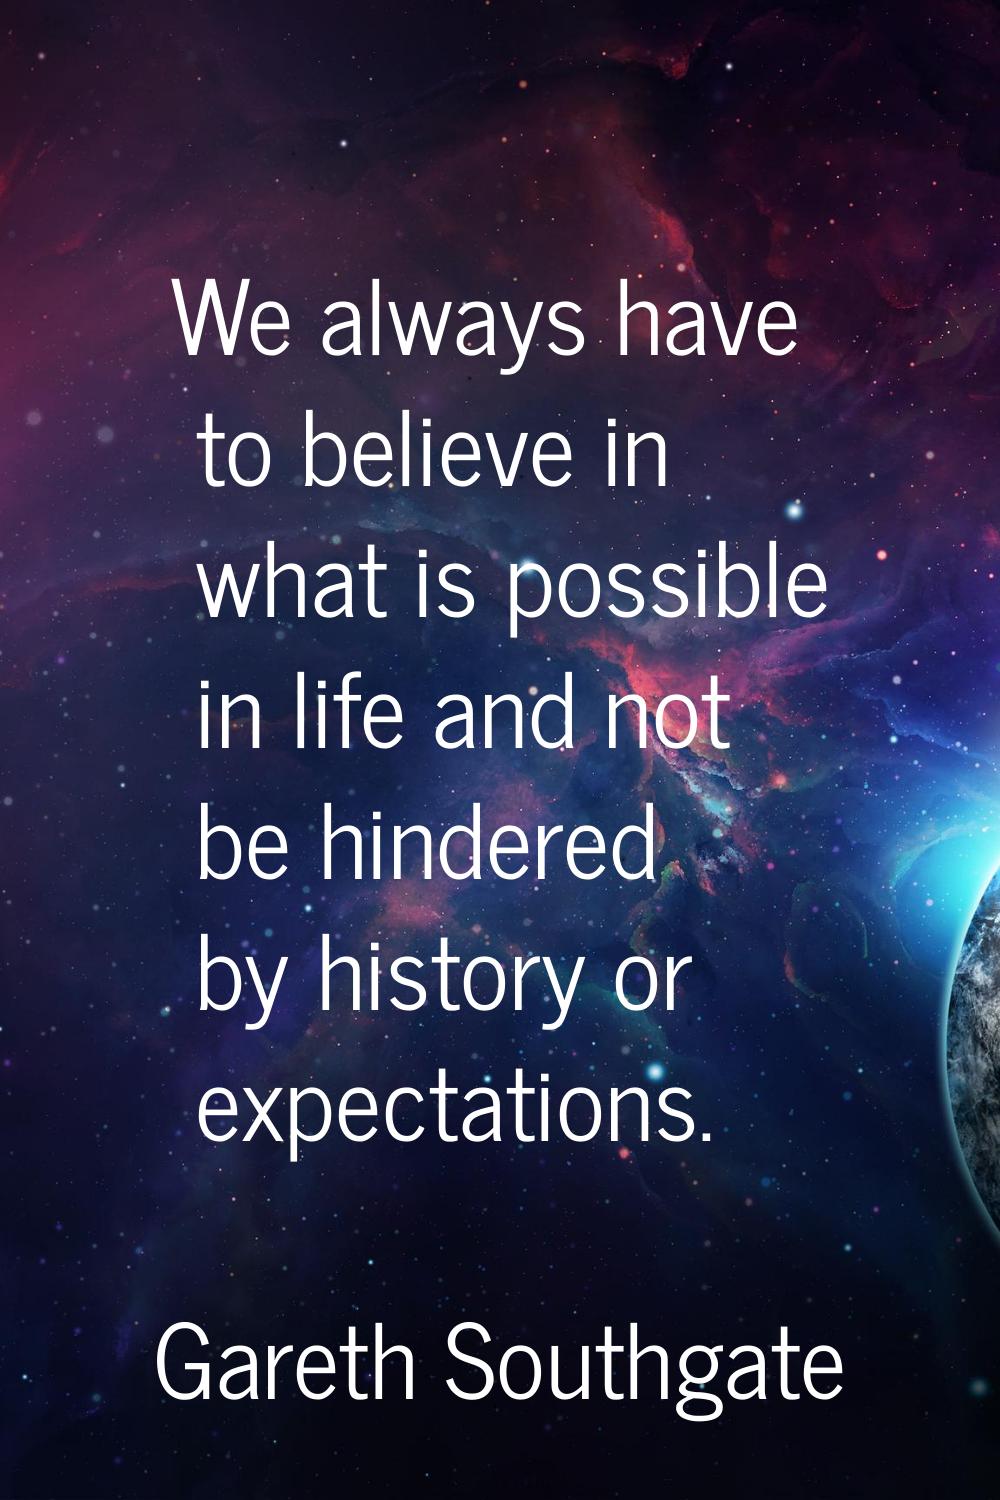 We always have to believe in what is possible in life and not be hindered by history or expectation